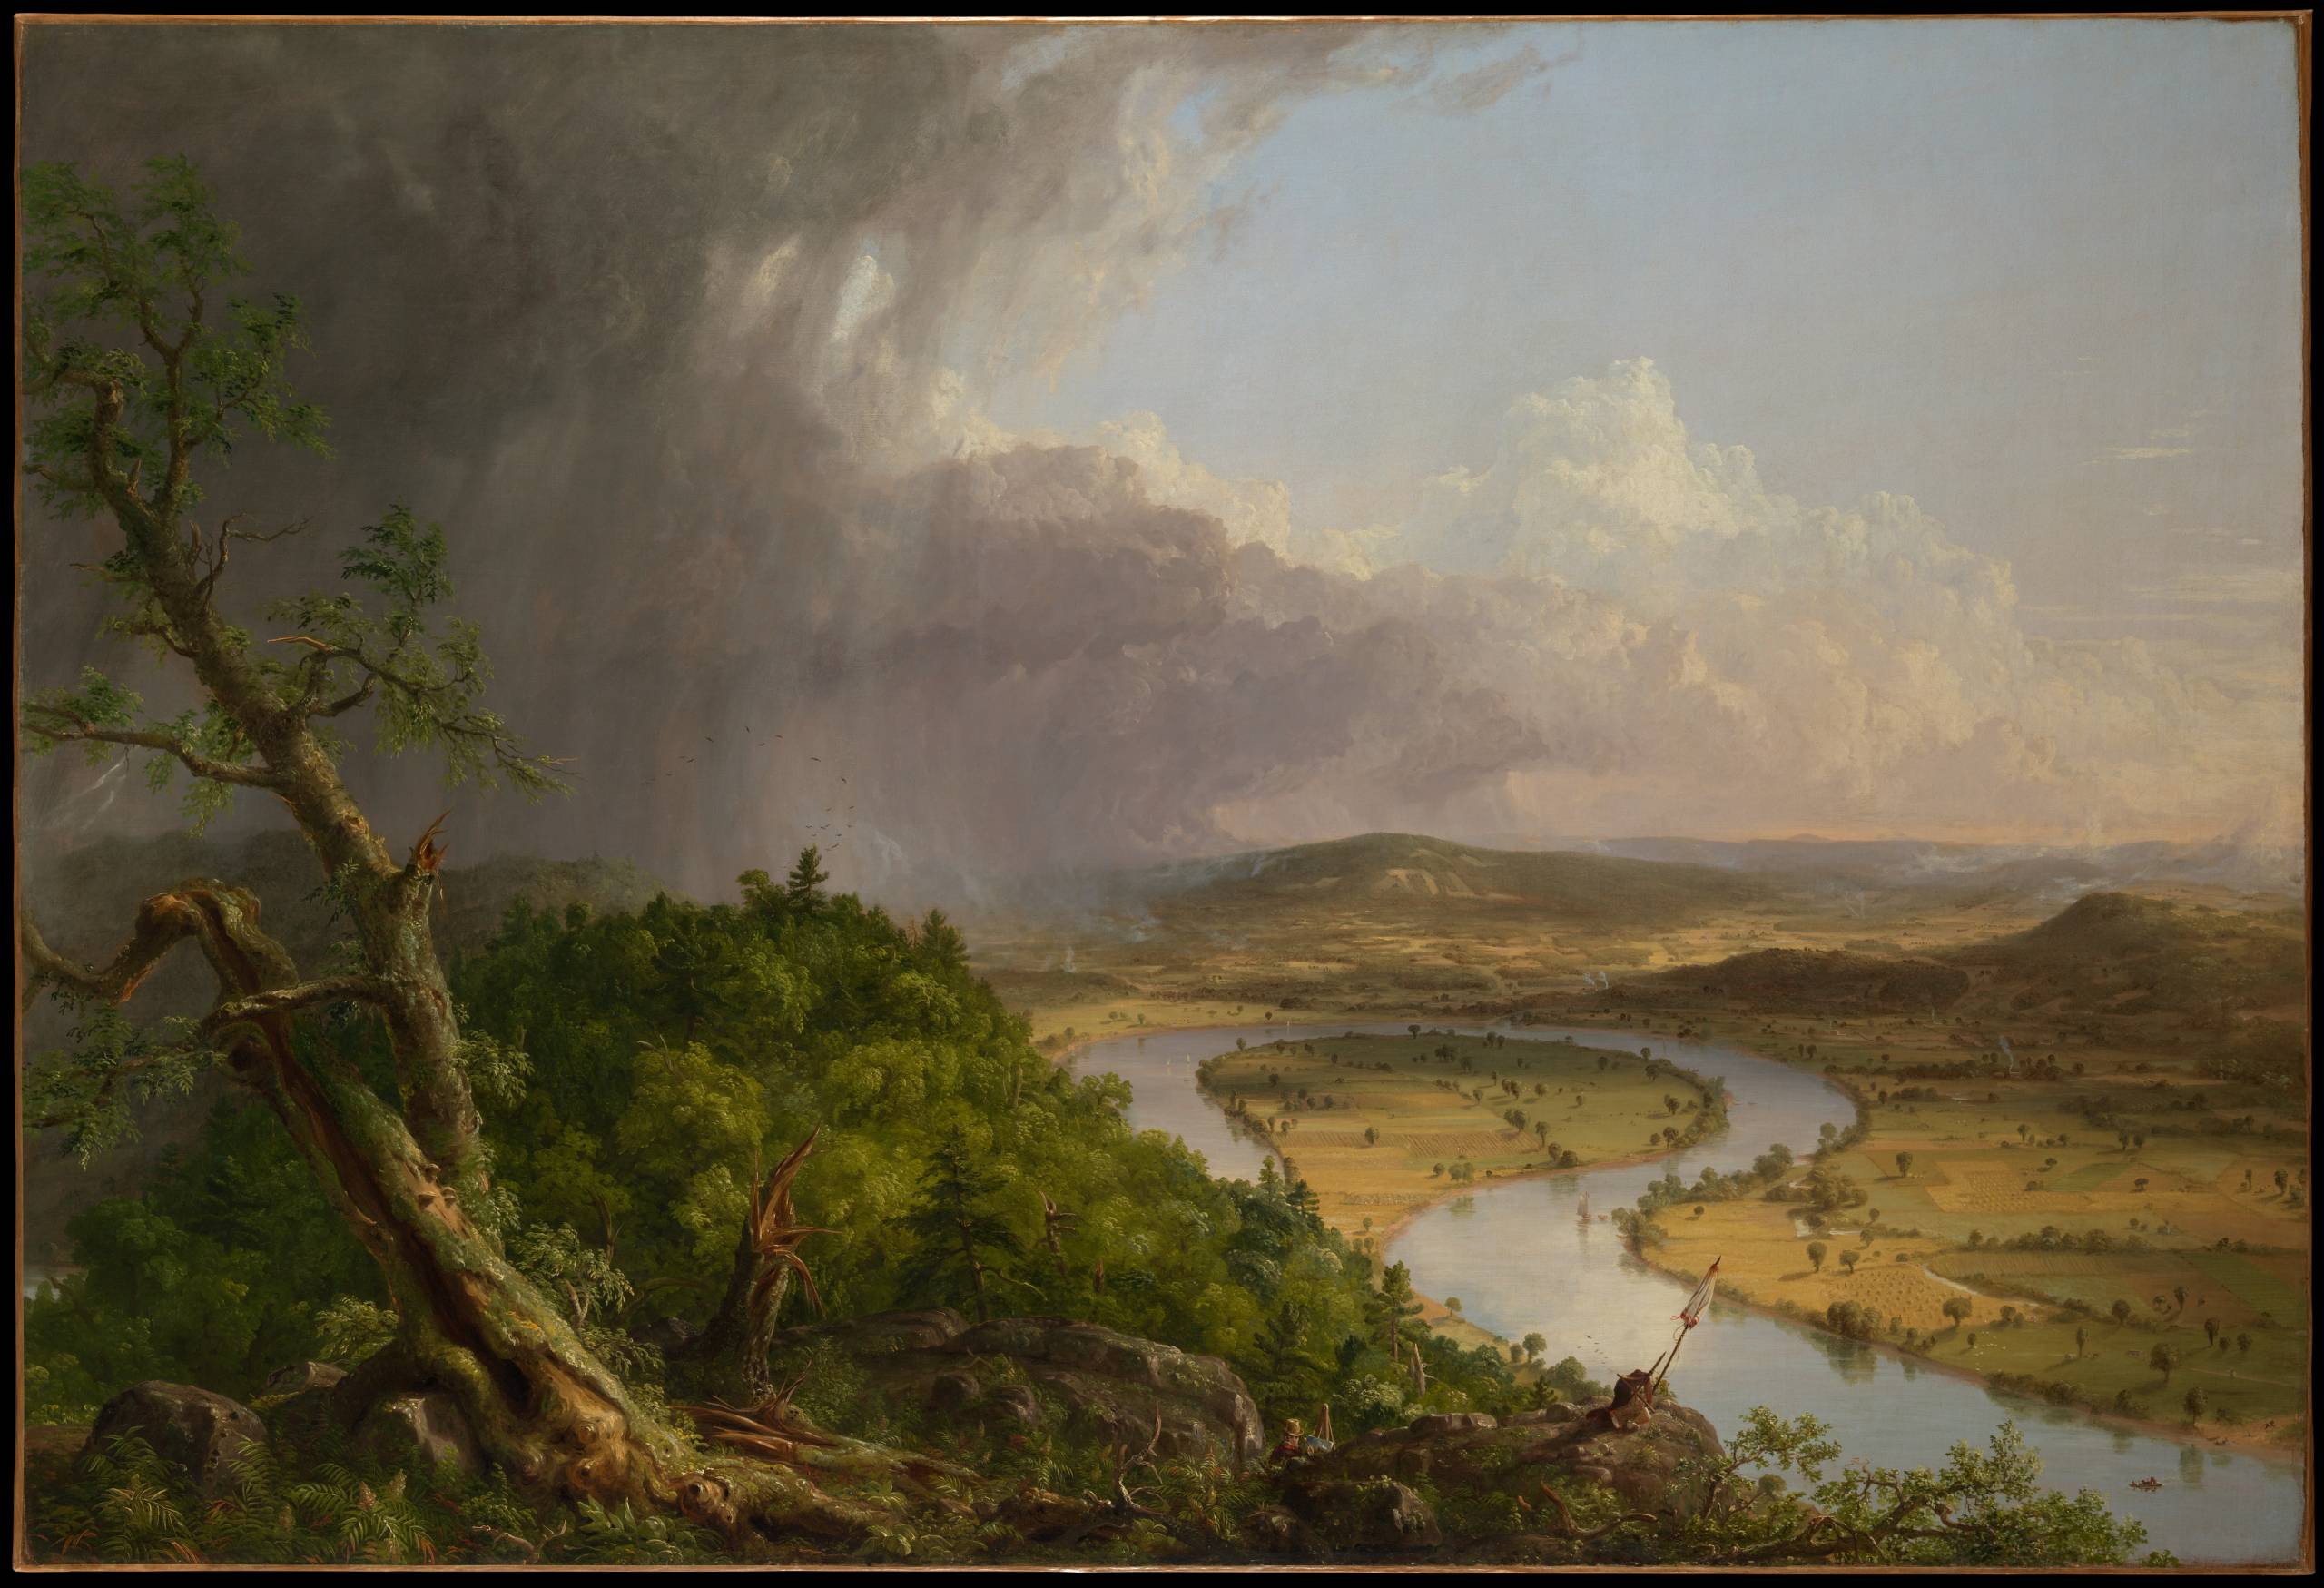 a Thomas Cole painting of a landscape after a storm foregrounded by a hill with dark clouds to the left and a river winding through plains in the background